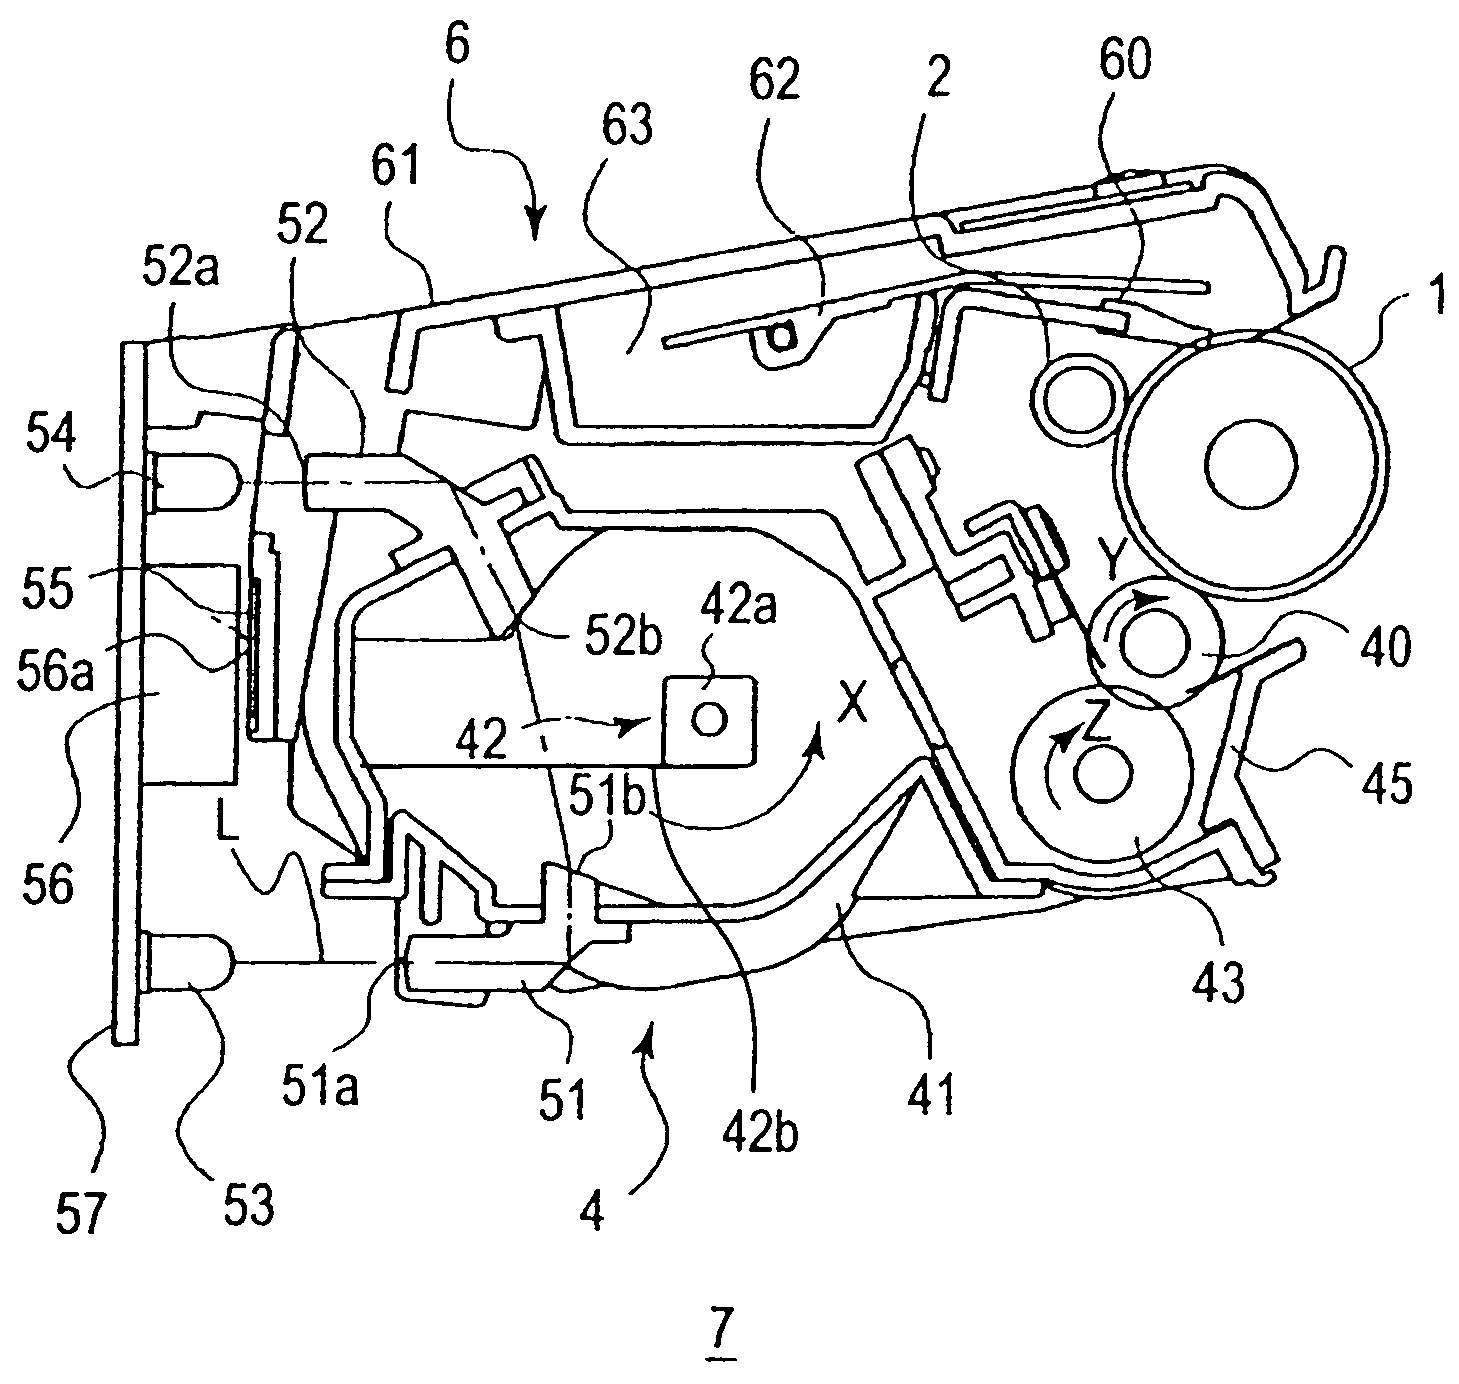 Process cartridge having light guides and memory member, and electrophotographic image forming apparatus to which such cartridge is mountable